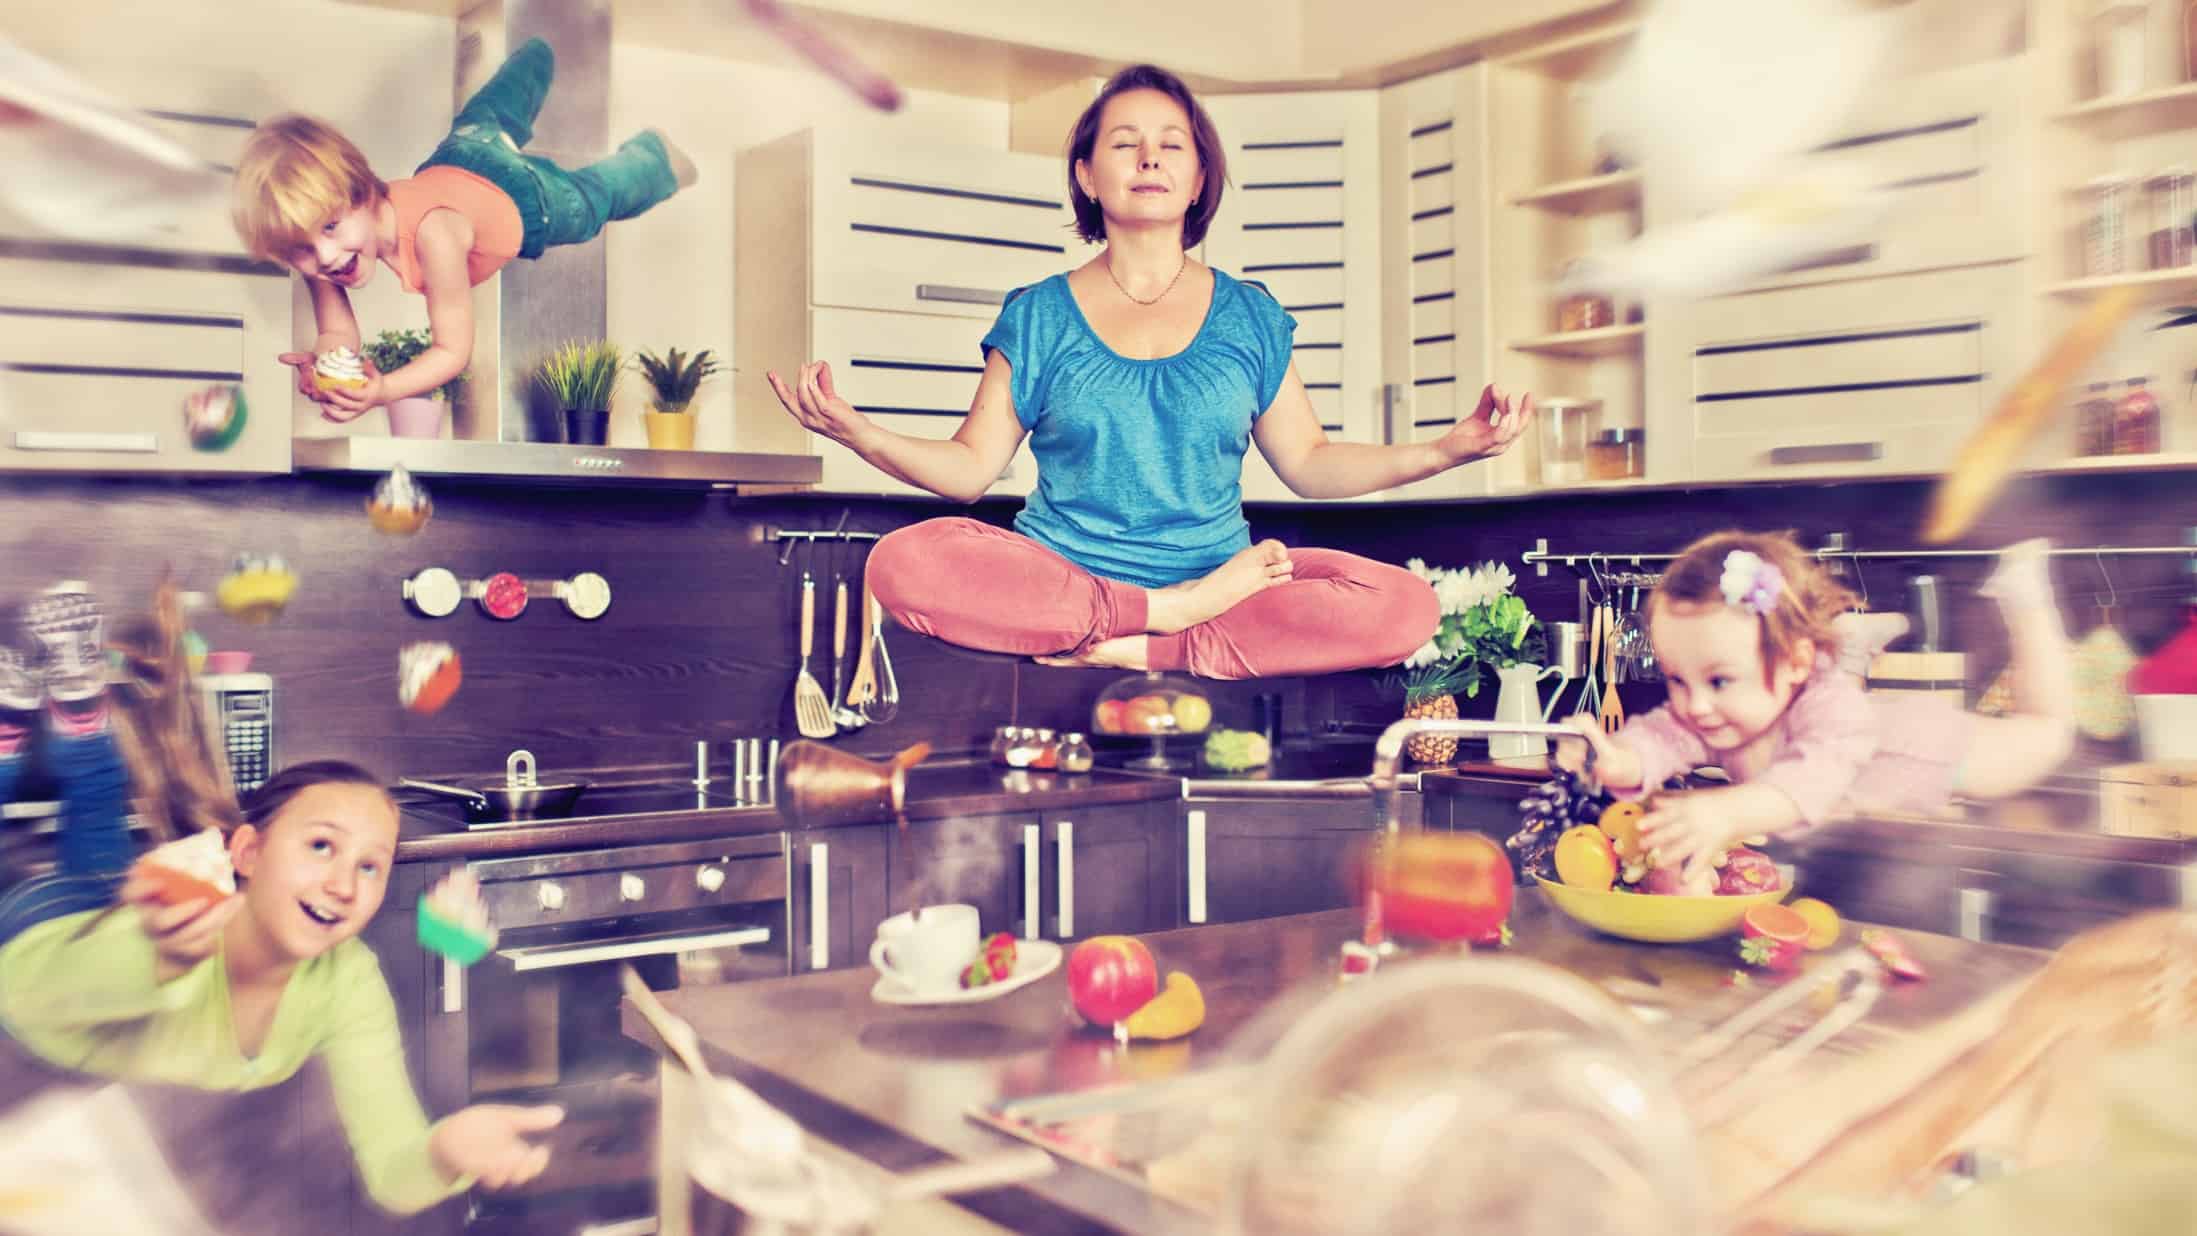 A mum levitates in a state of calm above the kitchen in her home, while the busyness and noise of kids, food and the chaos of everyday living whirls around her.